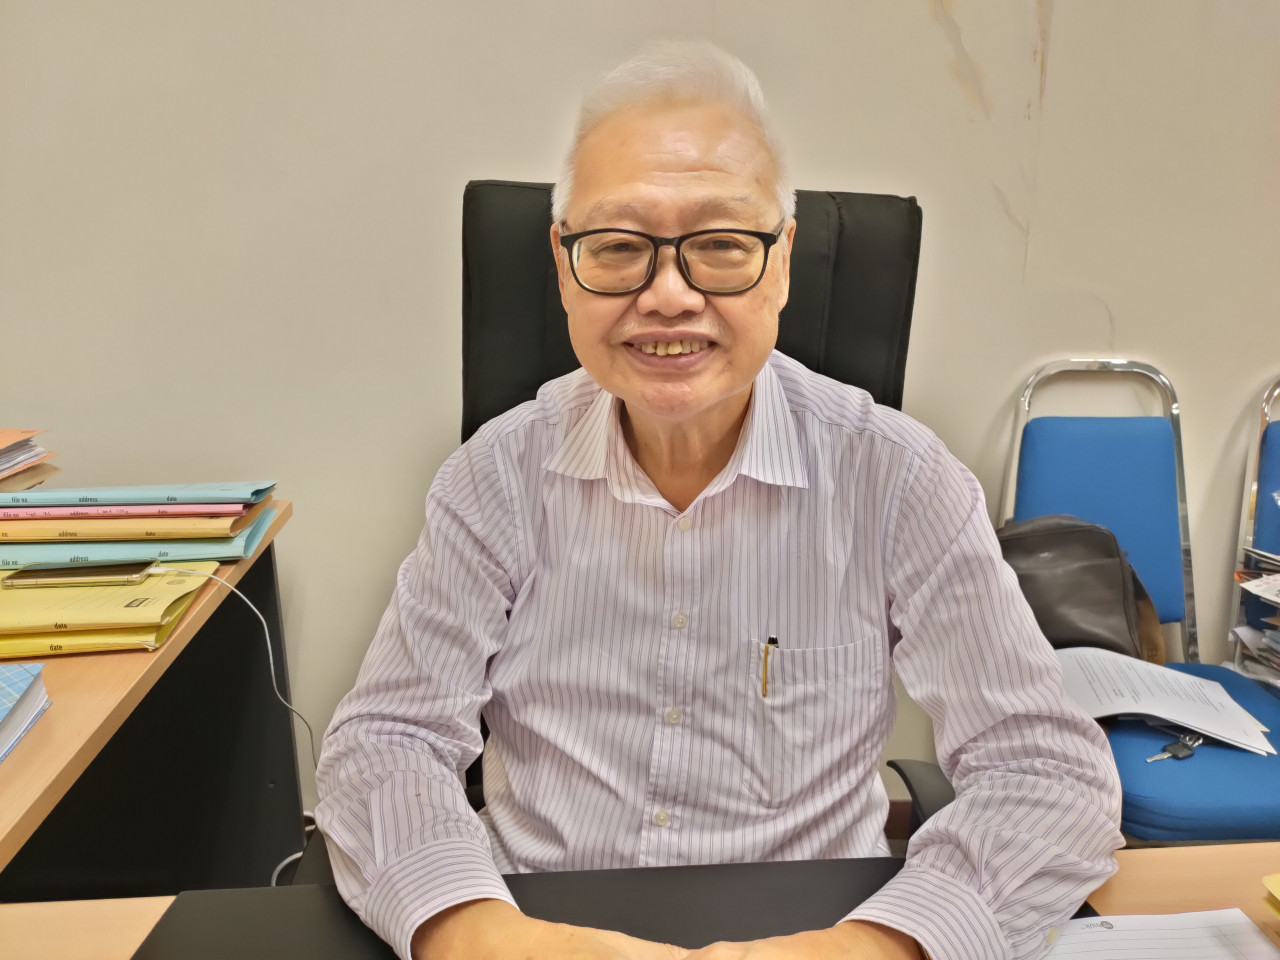 Tanjong Papat Kapitan (Chinese community leader) and former councillor Thomas Lau says that the homeowners are responsible for ensuring that the buildings are maintained properly, with proper toilets, trash management, and cleanliness. – REBECCA CHONG/The Vibes pic, July 24, 2022